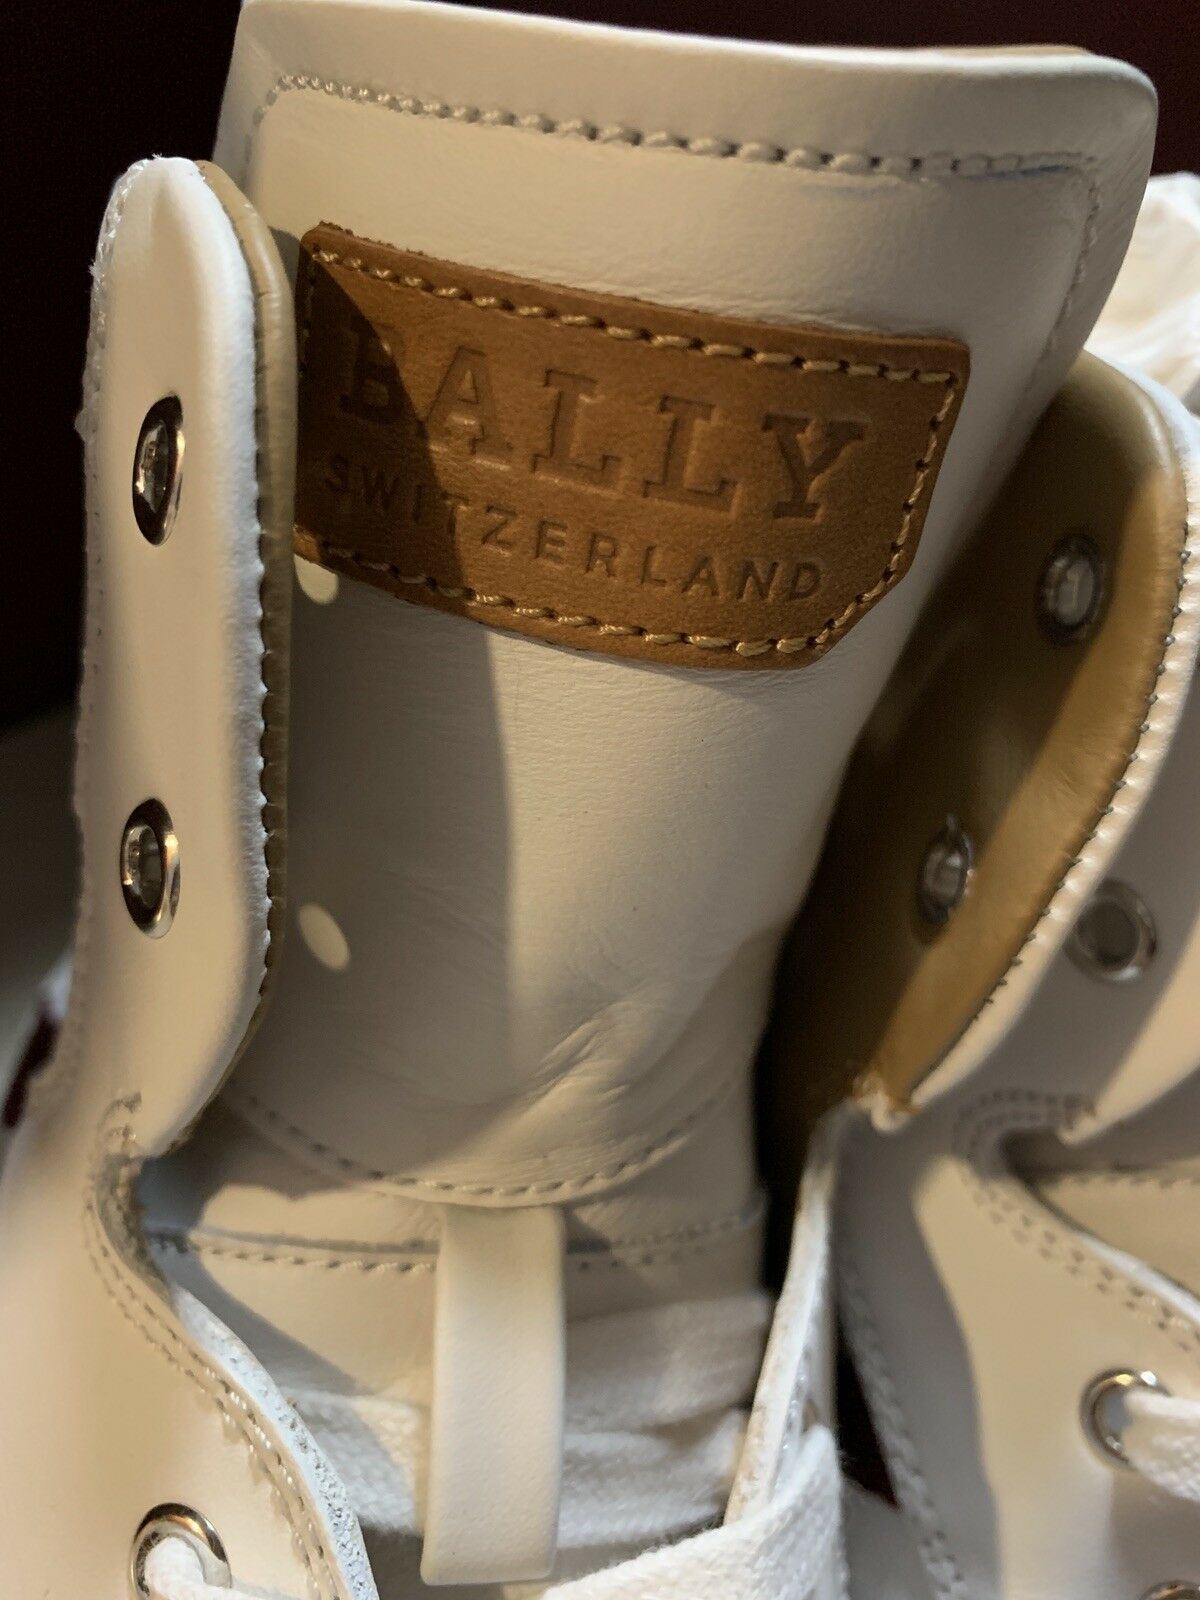 New $650 Bally Men Oldani Leather High-Top Sneakers White 6.5 US Italy